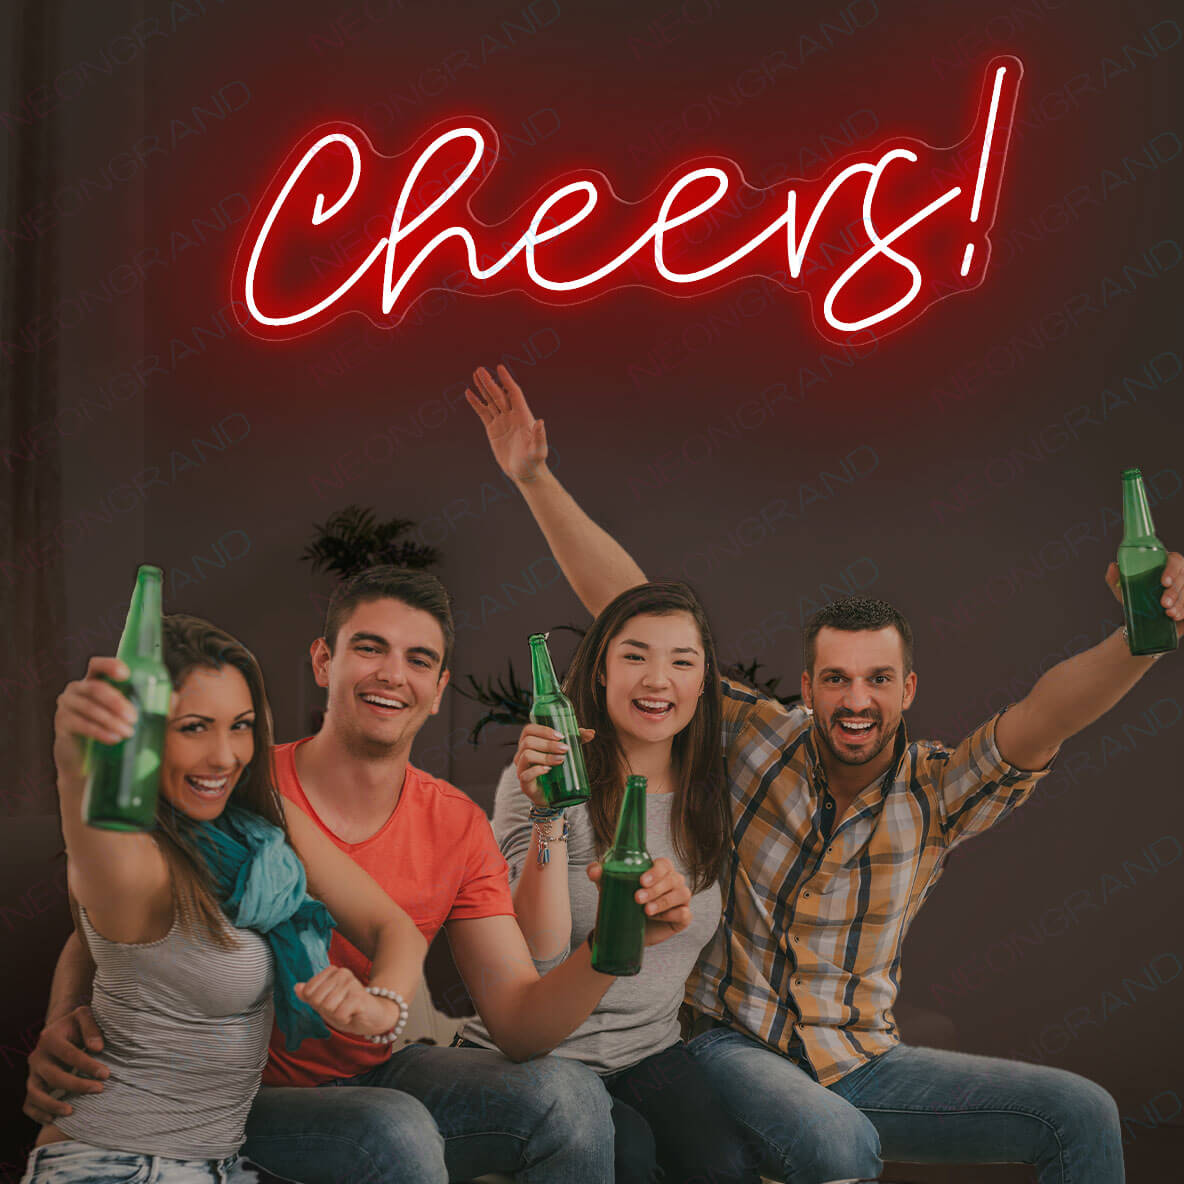 Cheers Neon Sign Led Light Up Bar Sign Red